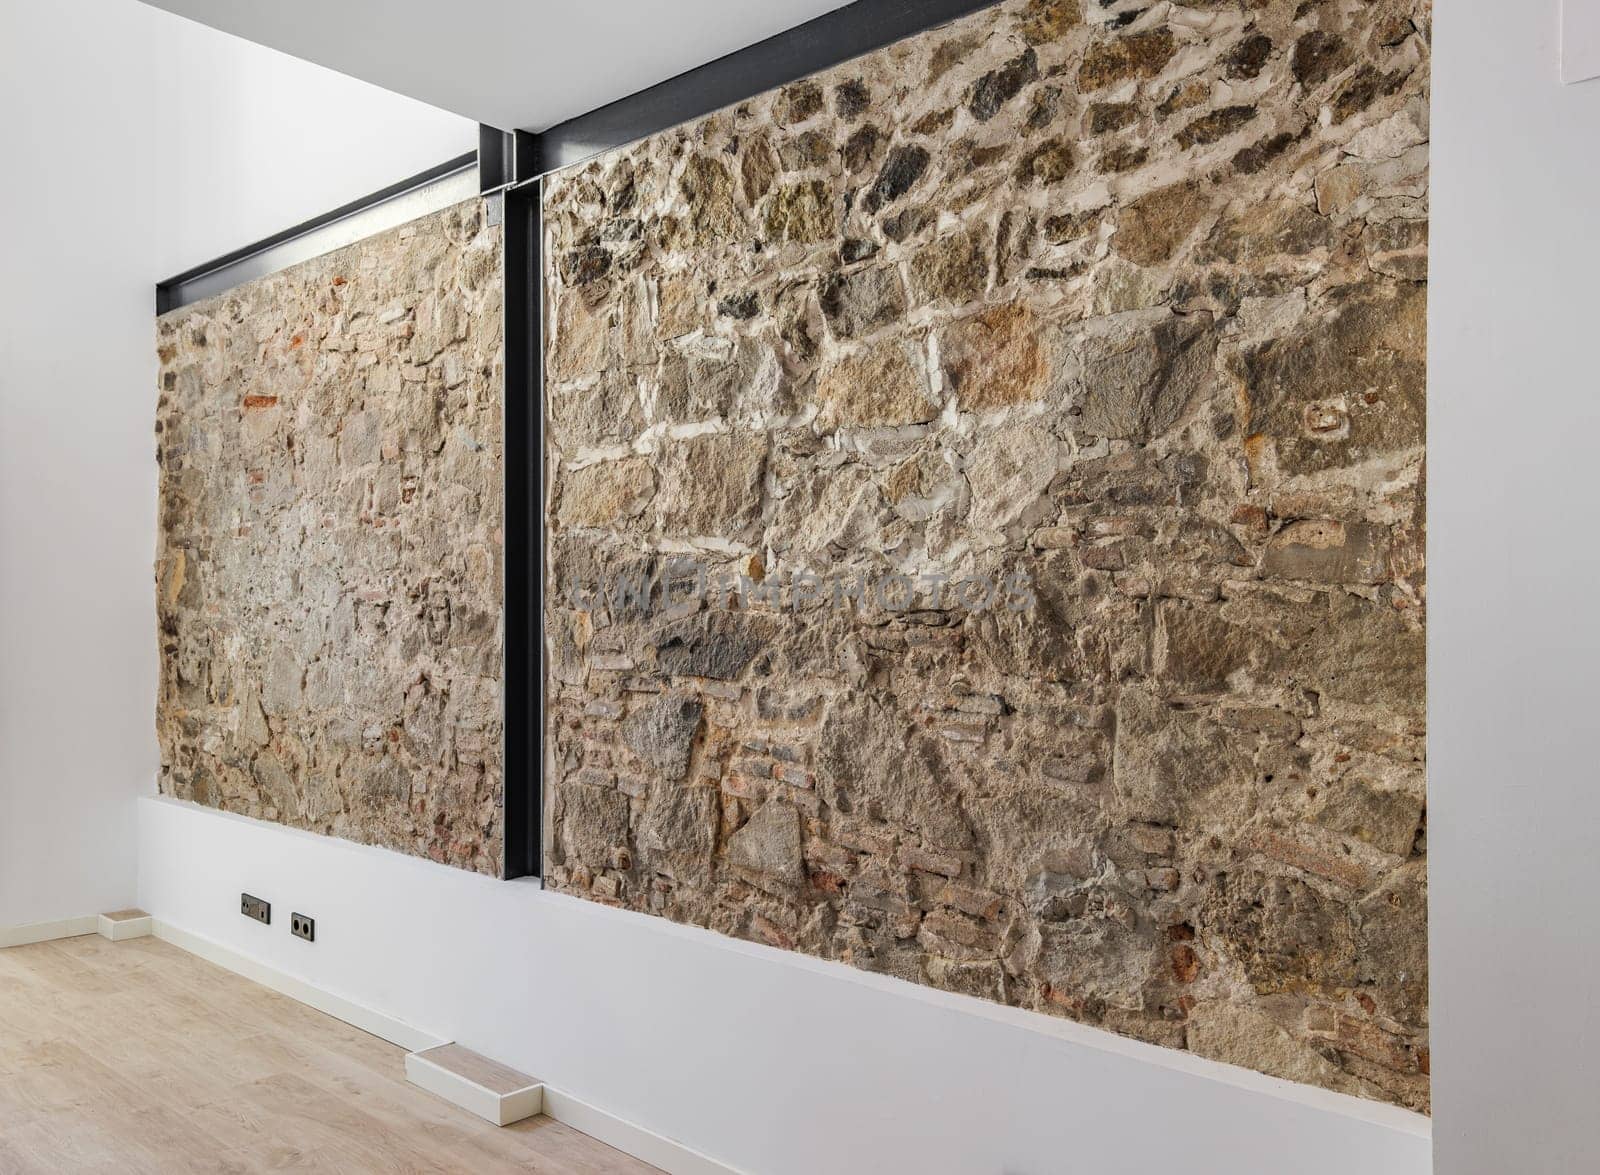 Restored ancient wall left from old city buildings in Barcelona. Interior of empty renovated apartment with stone wall